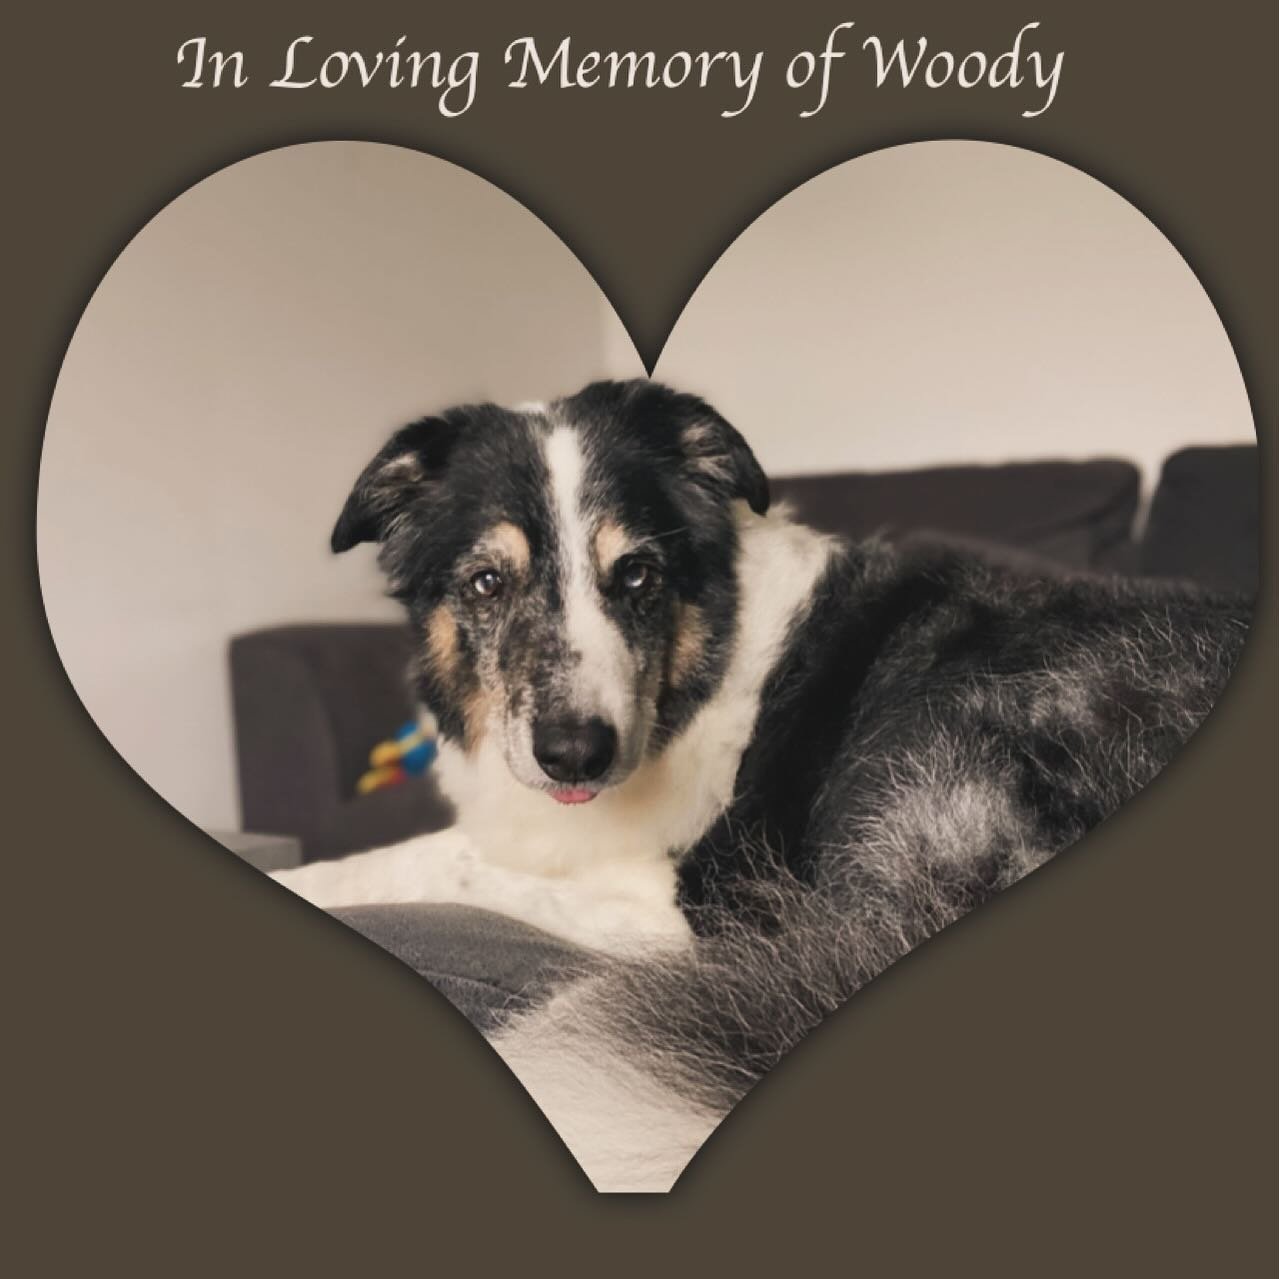 Every dog that I get to know I of course become attached to, so when they depart it&rsquo;s always hard as I do miss them. Woody was my lovely neighbour&rsquo;s so I saw him often and he was always so happy to see me. He was one of a kind and will be